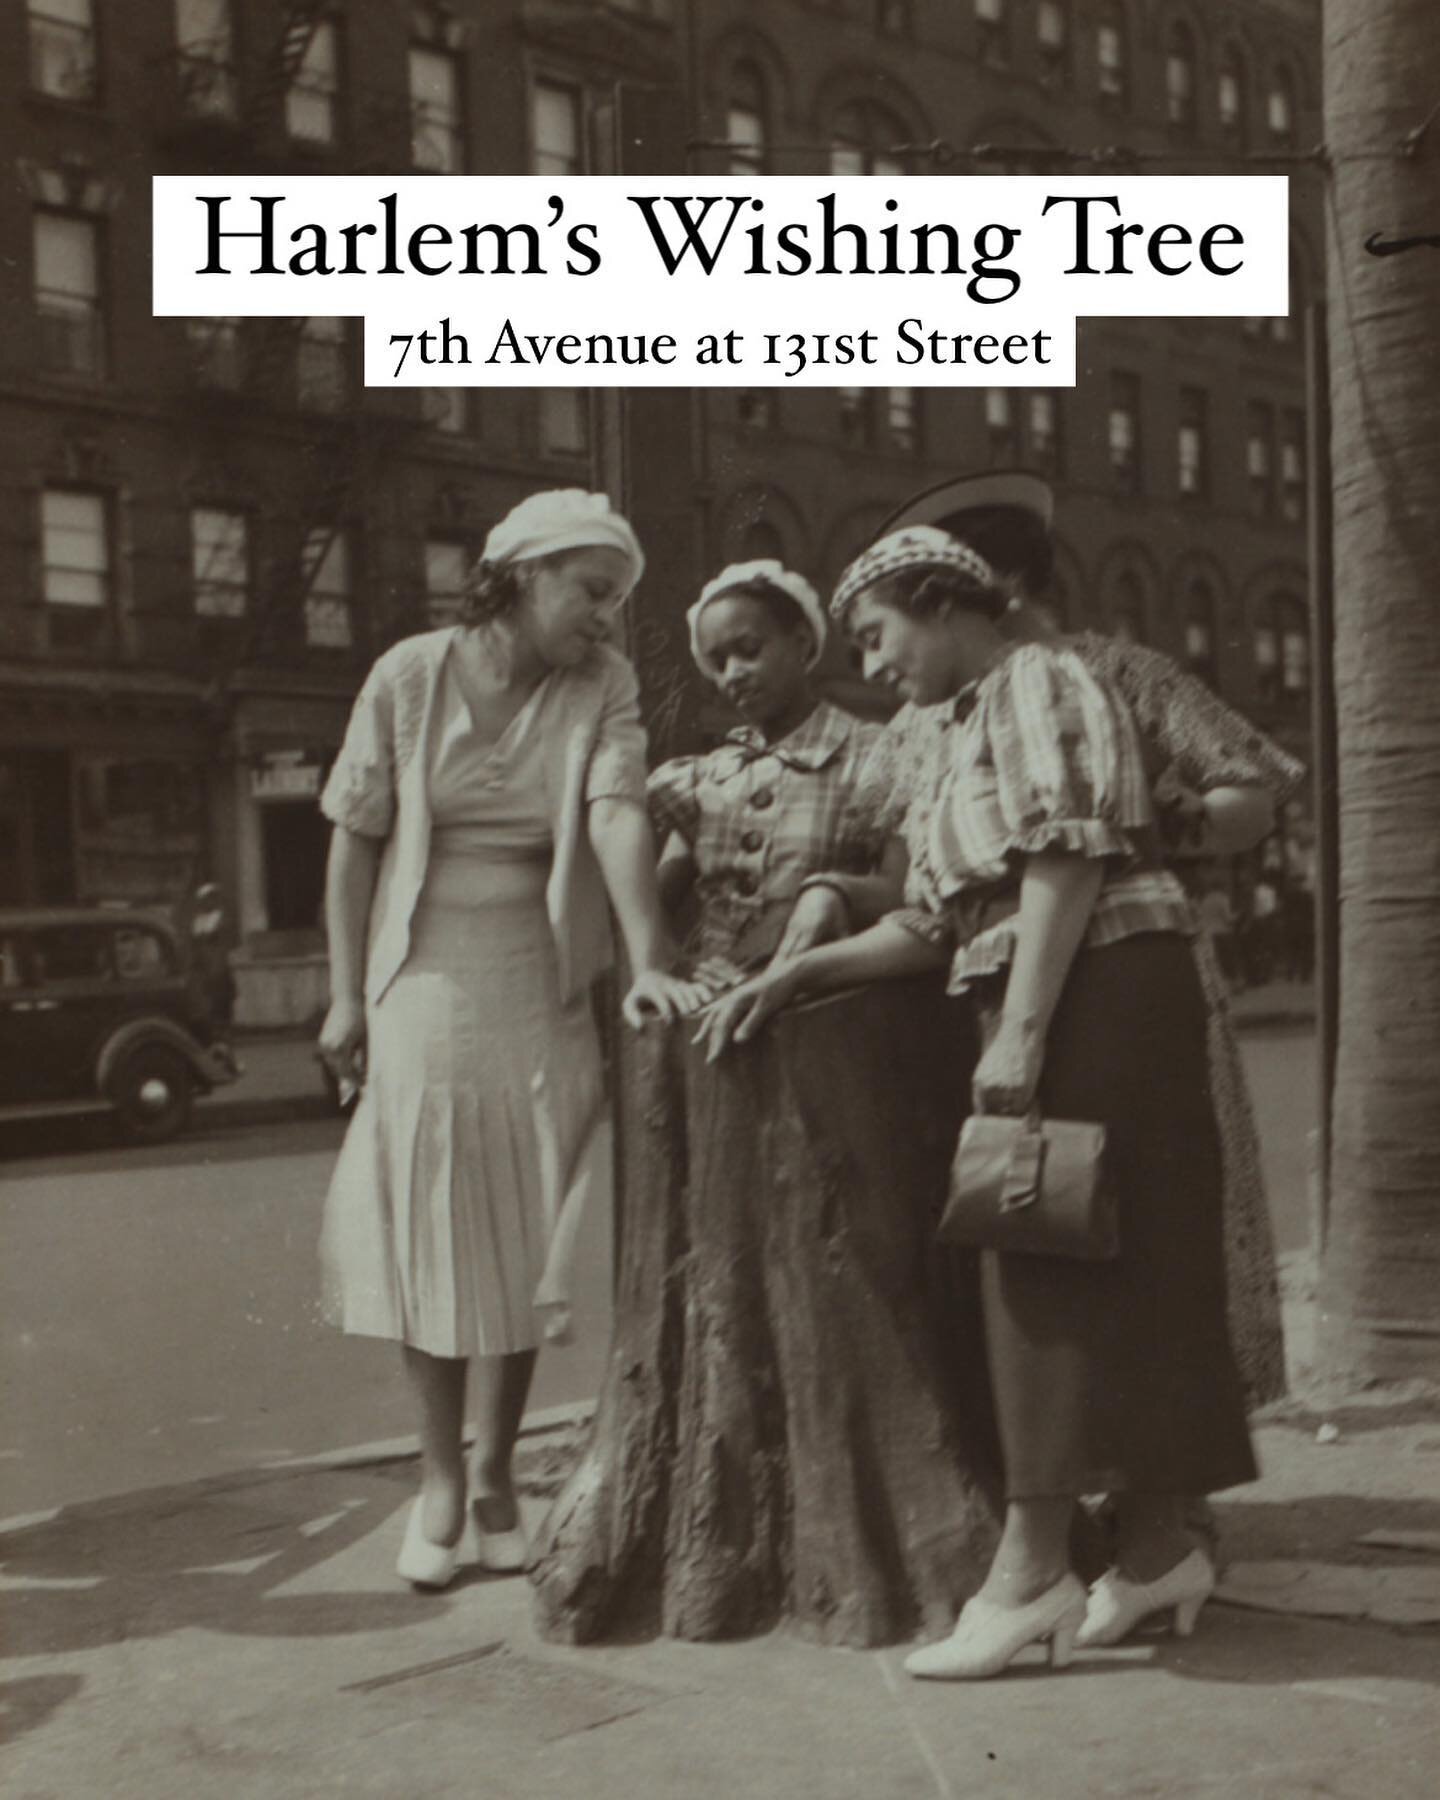 Harlem in the 1920s was a neighborhood pulsing with youth and energy. Its staid brownstones and apartment blocks were crowded with a whole new generation of Harlemites, many of them transplants from the Deep South. In such a thrumming, energetic neig